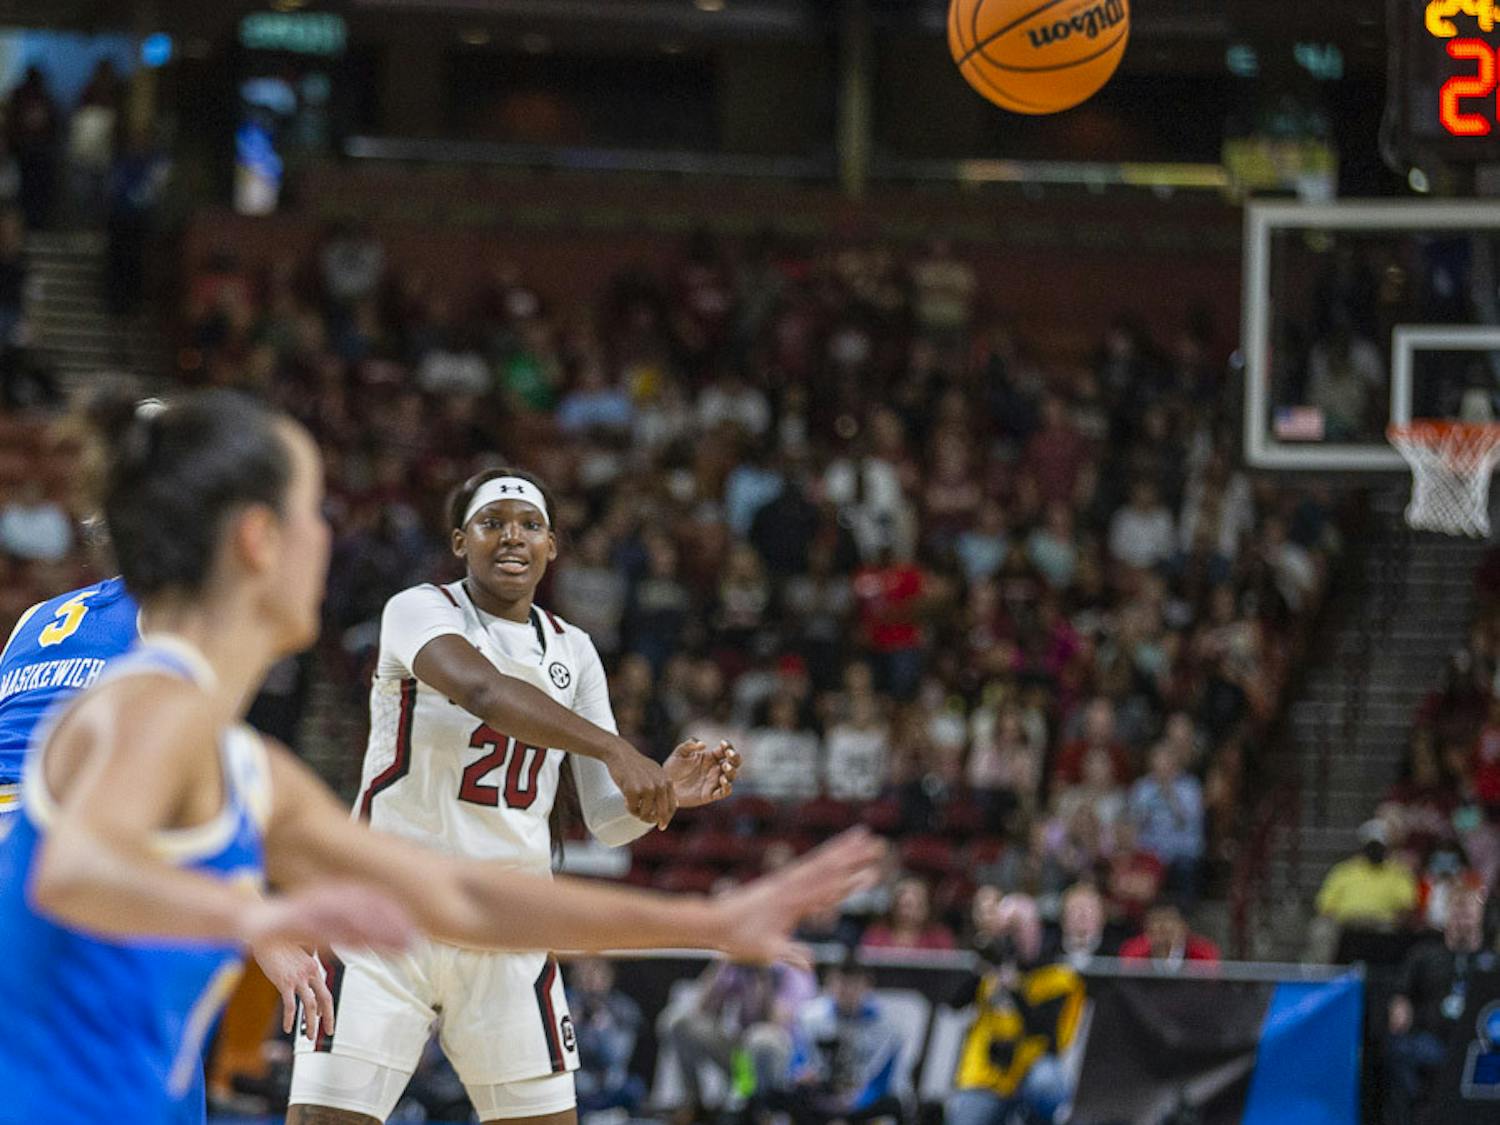 Sophomore forward Sania Feagin passes the ball to a teammate during the matchup between South Carolina and UCLA at Bon Secours Wellness Arena on March 25, 2023. The Gamecocks beat the Bruins 59-43 and will move on to the Elite Eight tournament.&nbsp;